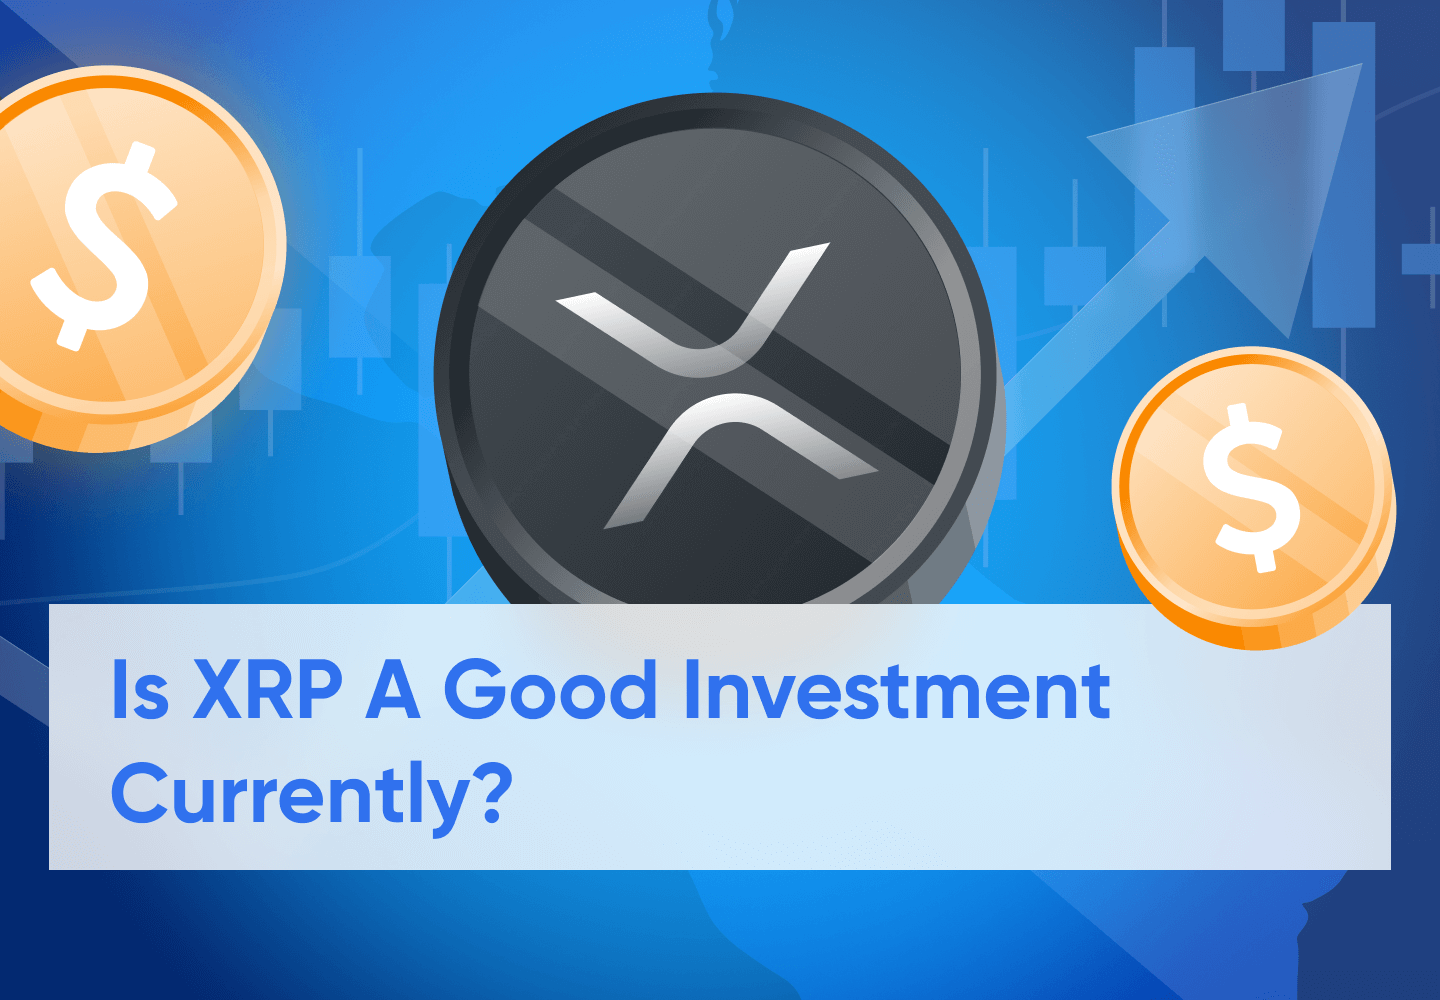 What Caused XRP Price to Spike, Should We Buy the Dip?